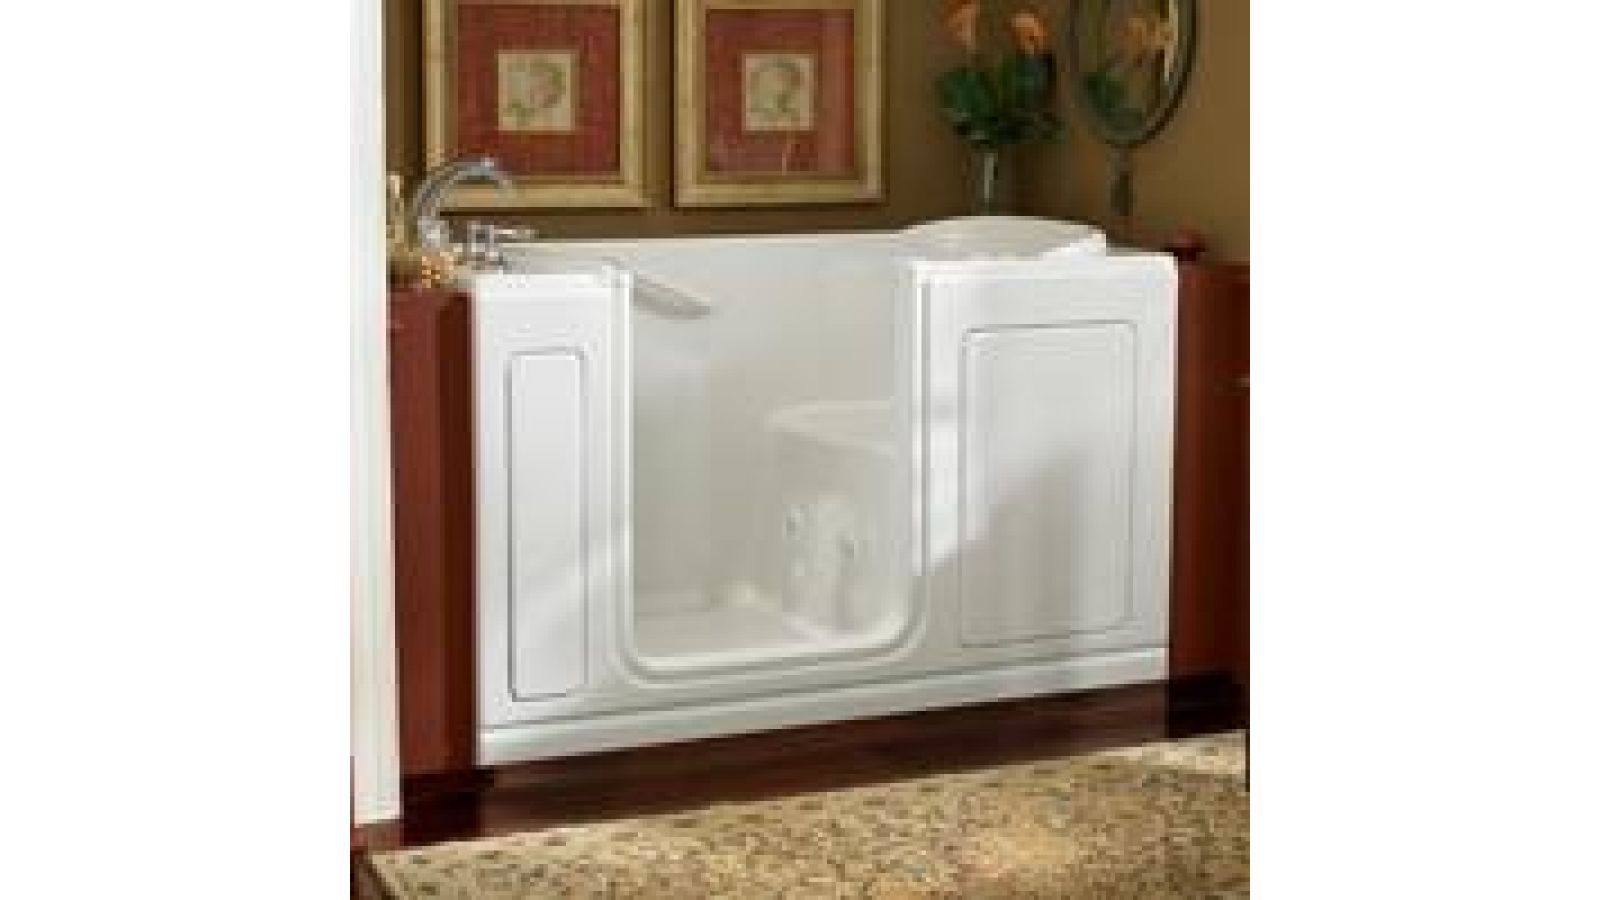 The 6032XL Walk-In Tub for Larger Bathers